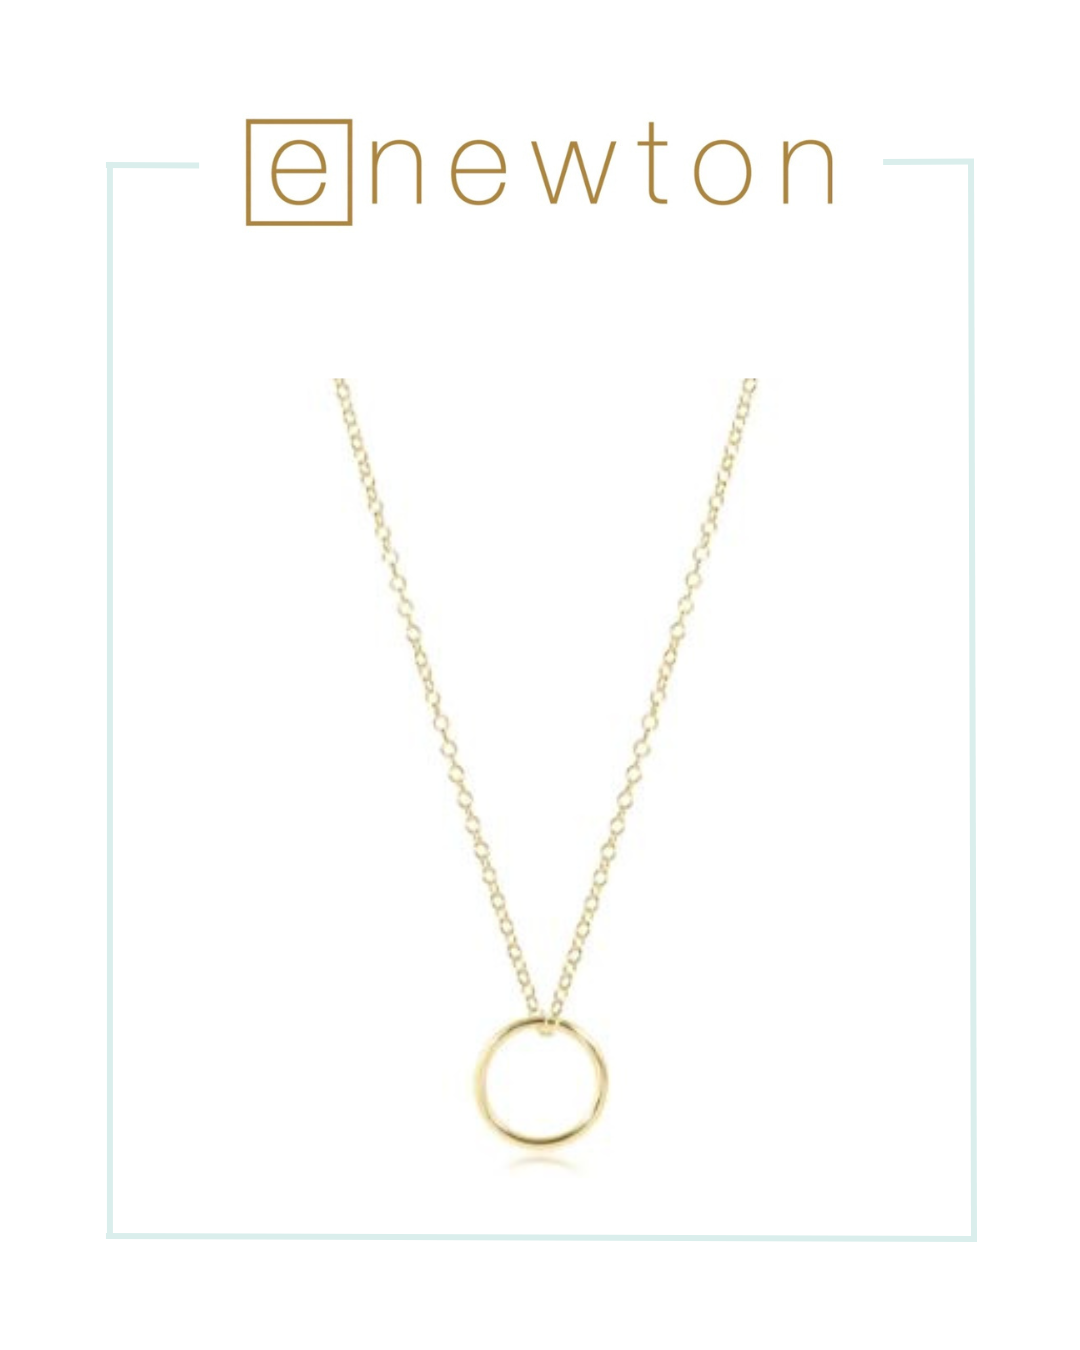 E Newton 16" Halo Gold Charm Necklace-Necklaces-ENEWTON-The Village Shoppe, Women’s Fashion Boutique, Shop Online and In Store - Located in Muscle Shoals, AL.